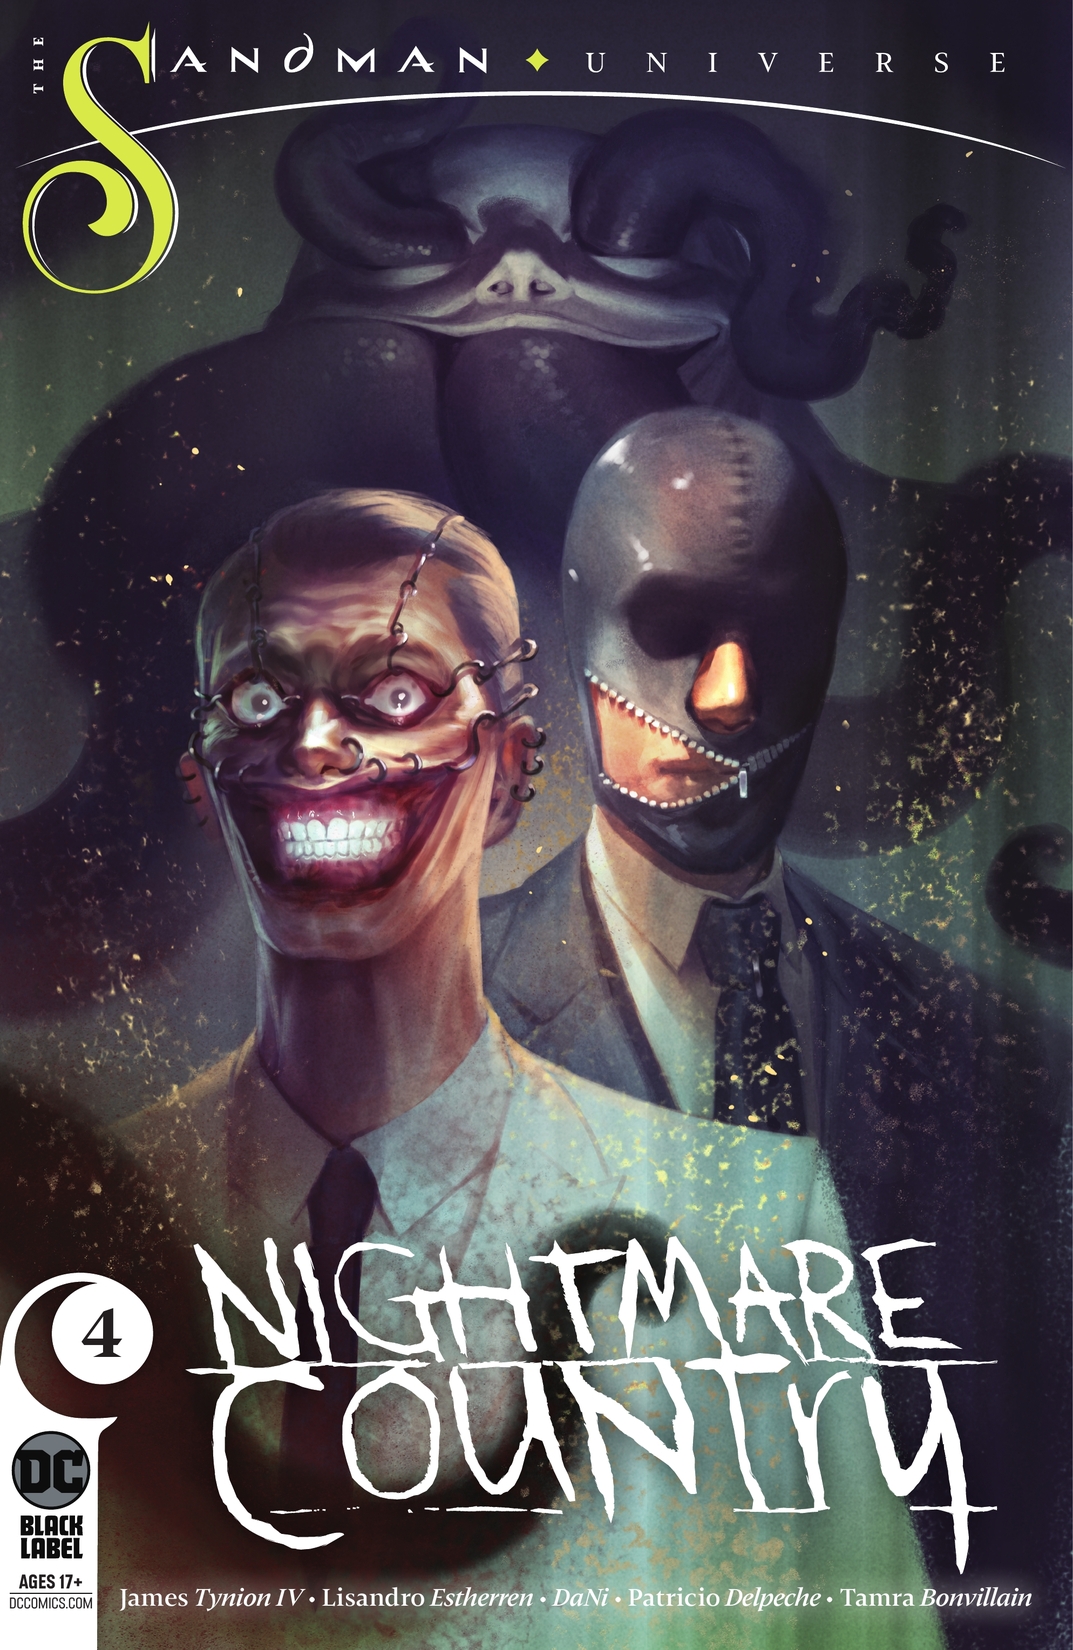 The Sandman Universe: Nightmare Country #4 preview images